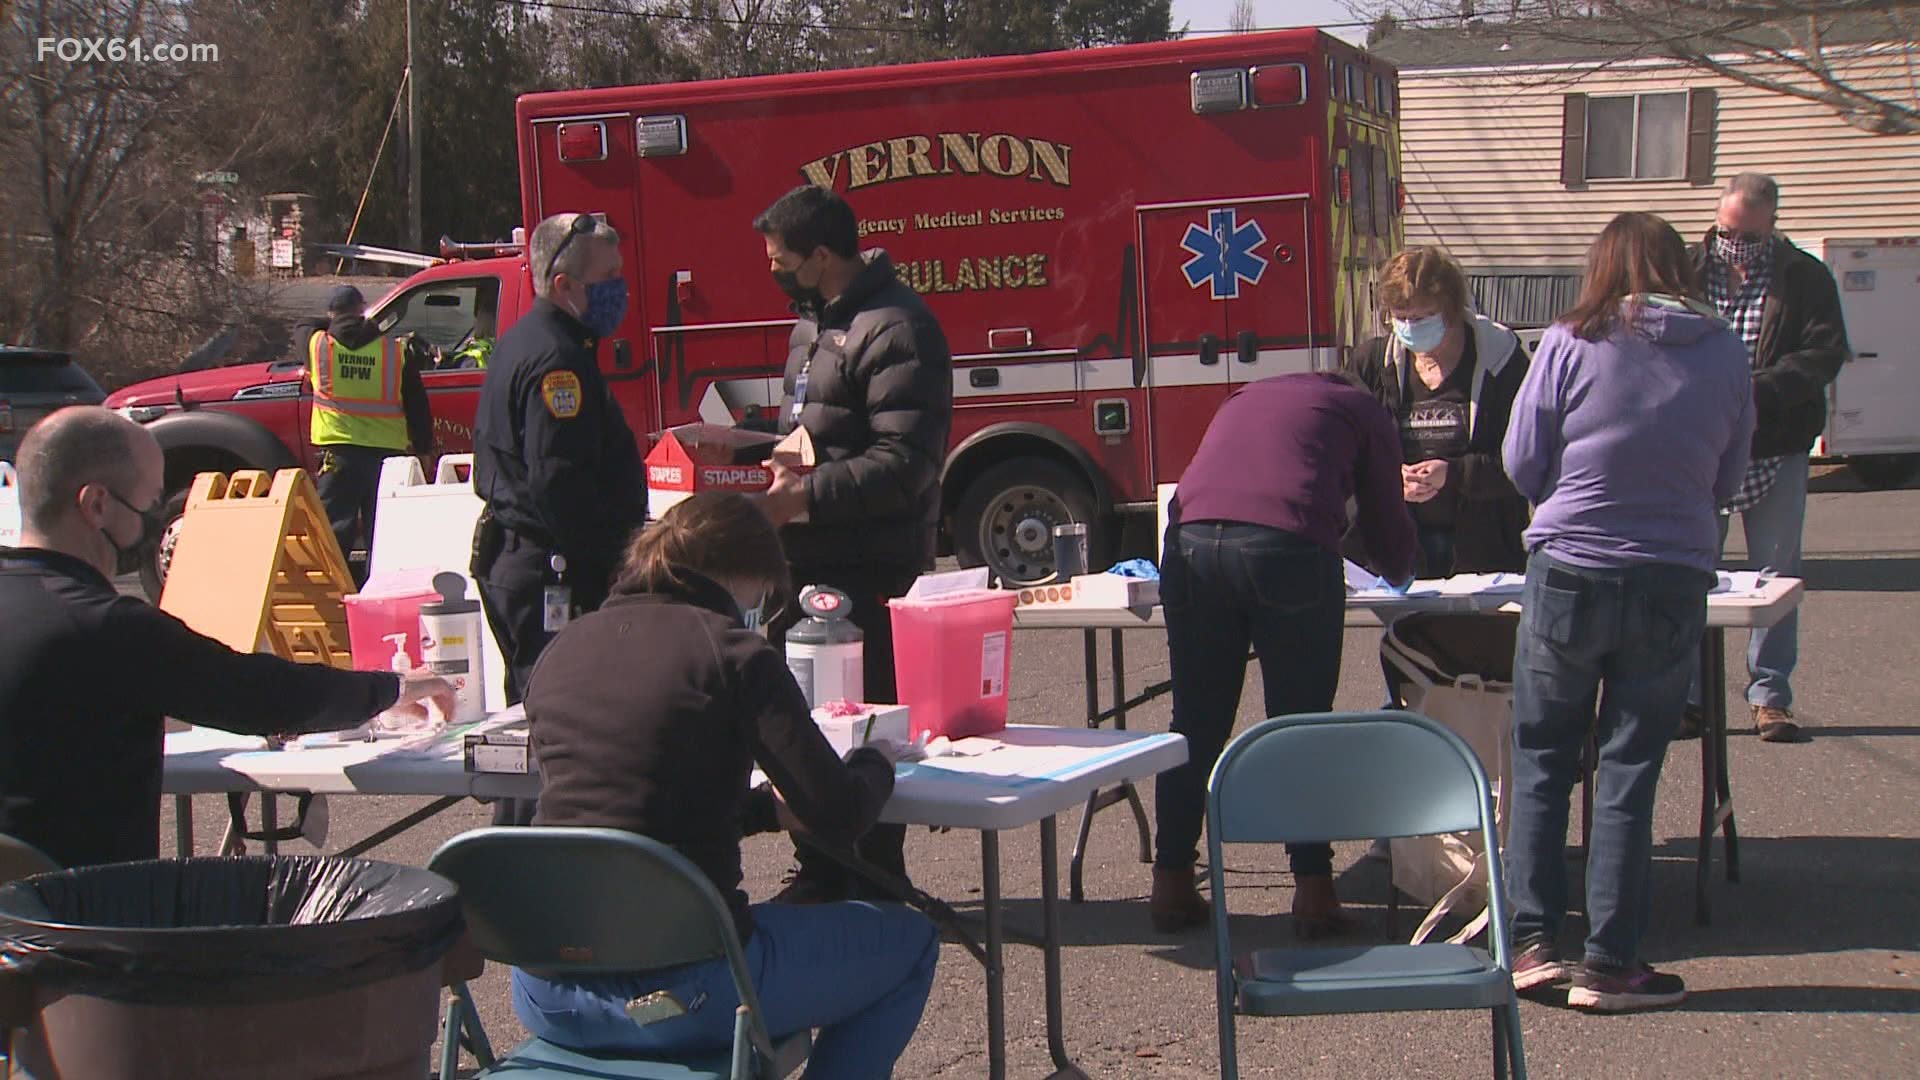 A mobile vaccination clinic was held at the Vernon villages, a congregate setting with more than 200 residents.